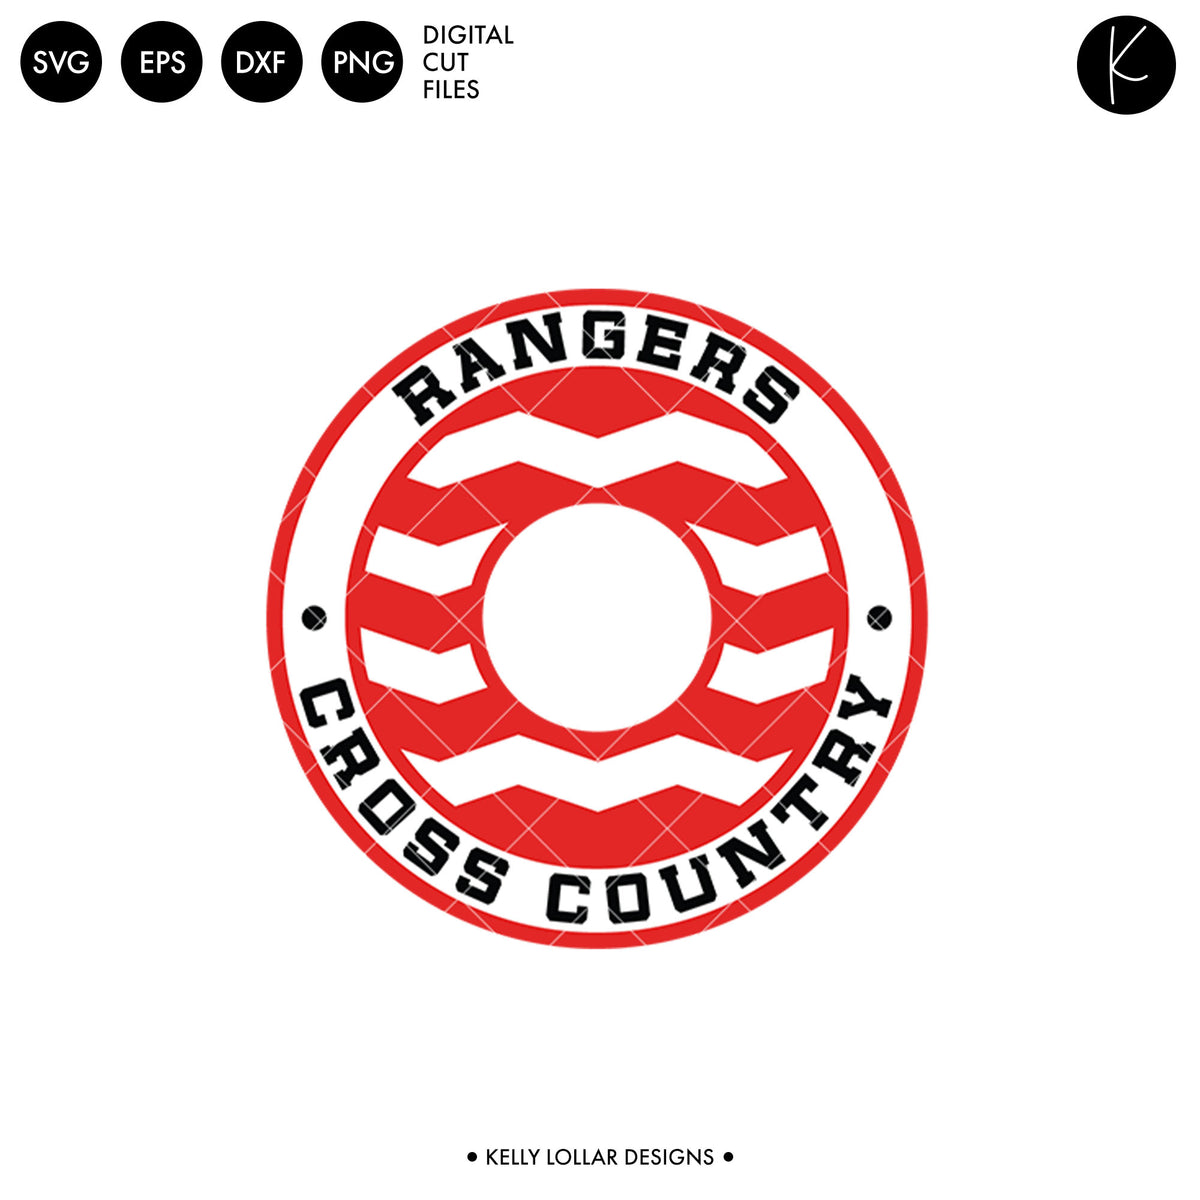 Rangers Cross Country Bundle | SVG DXF EPS PNG Cut Files